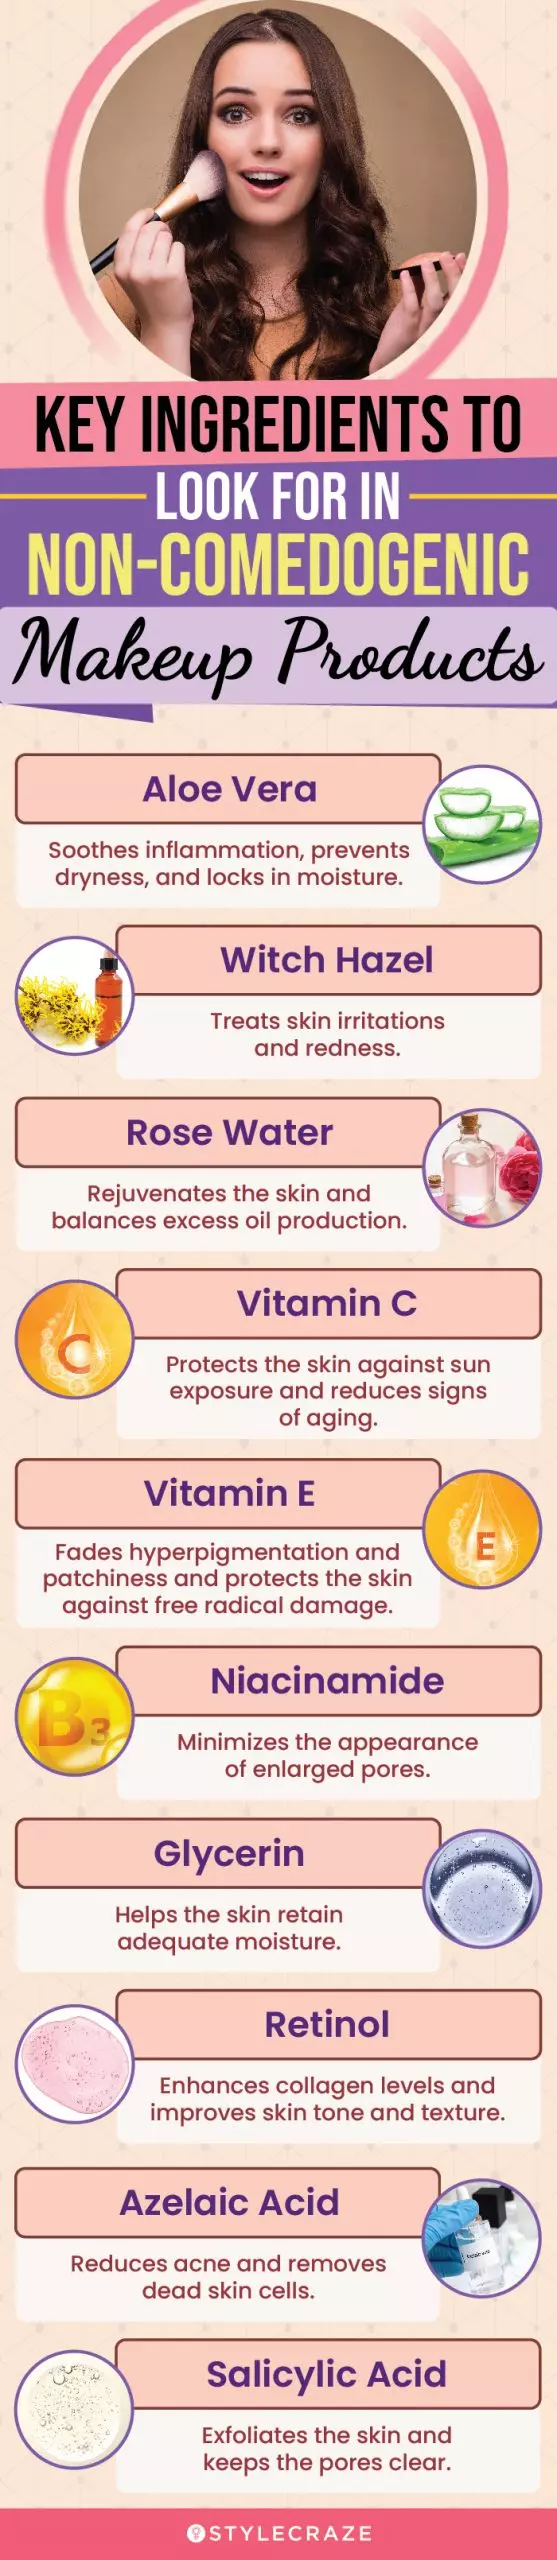 Key Ingredients To Look For In Non-Comedogenic Makeup Products (infographic)